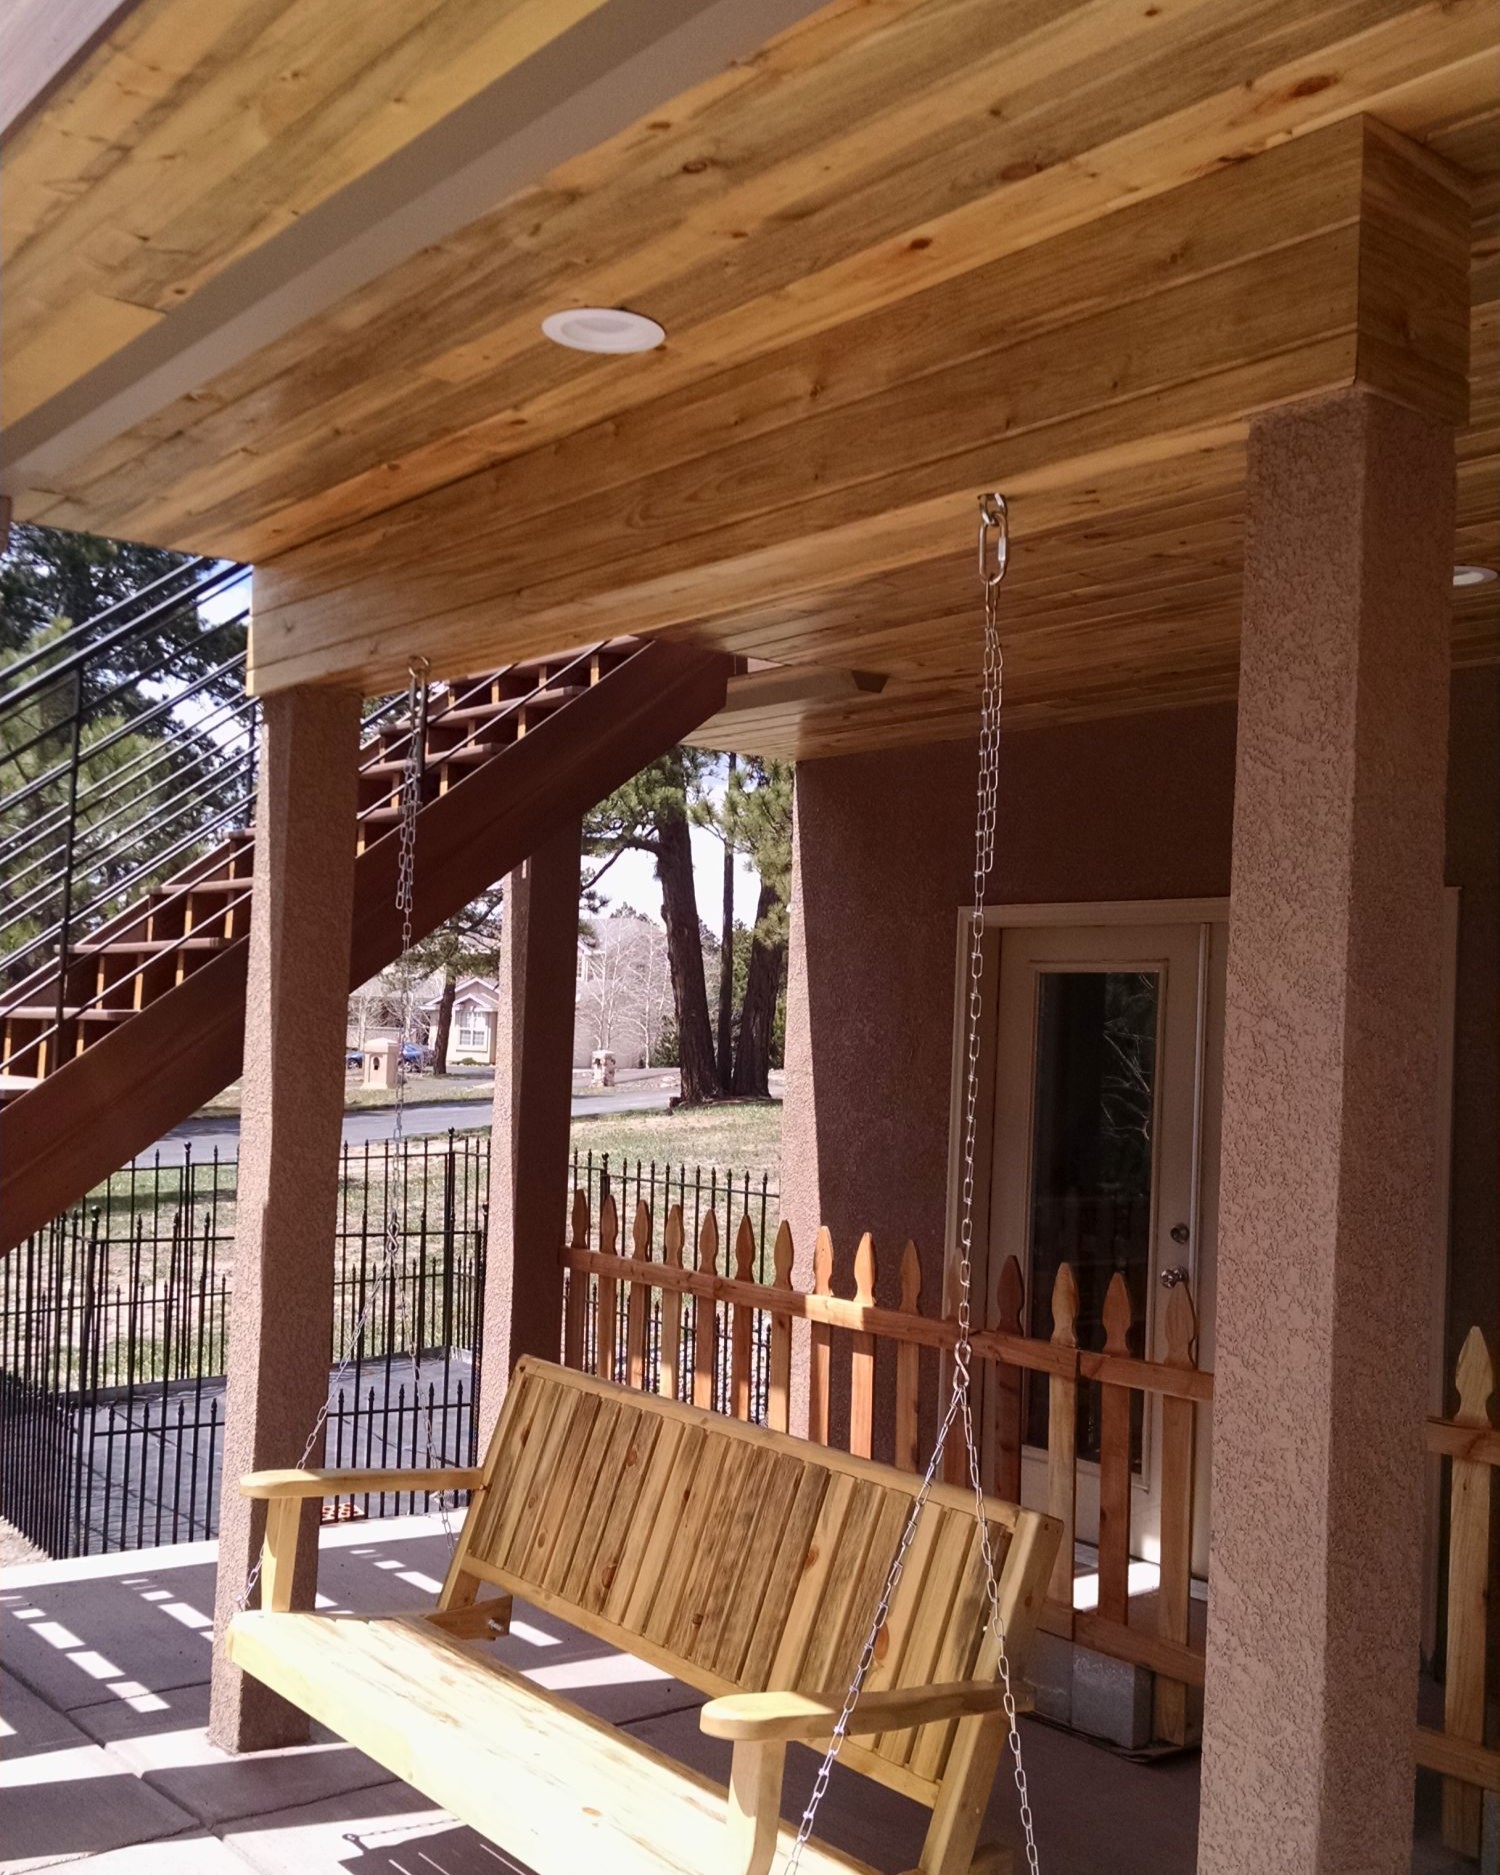 Under-deck drainage system with a Beetle Kill Pine tongue and groove ceiling and recessed lights. We also installed a wood swing for the owners to enjoy.